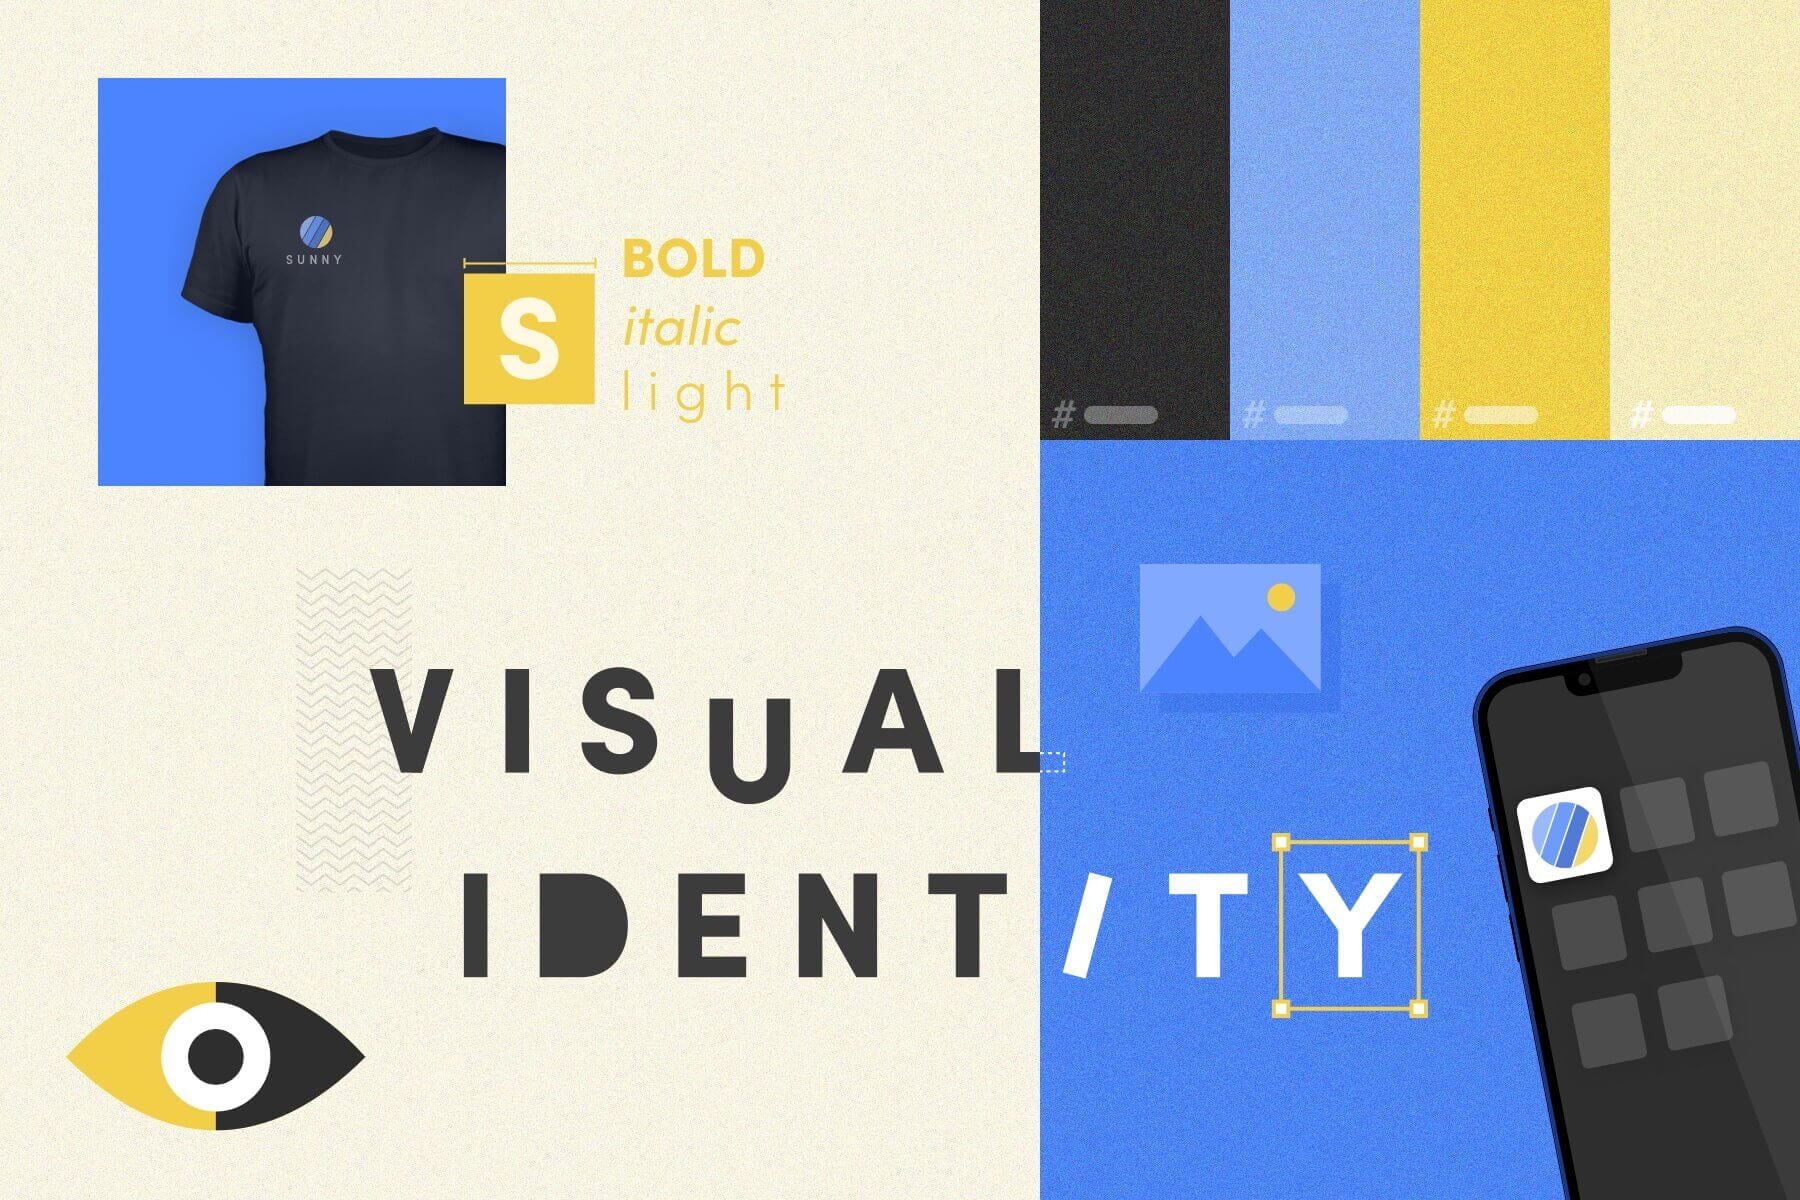 What is visual identity